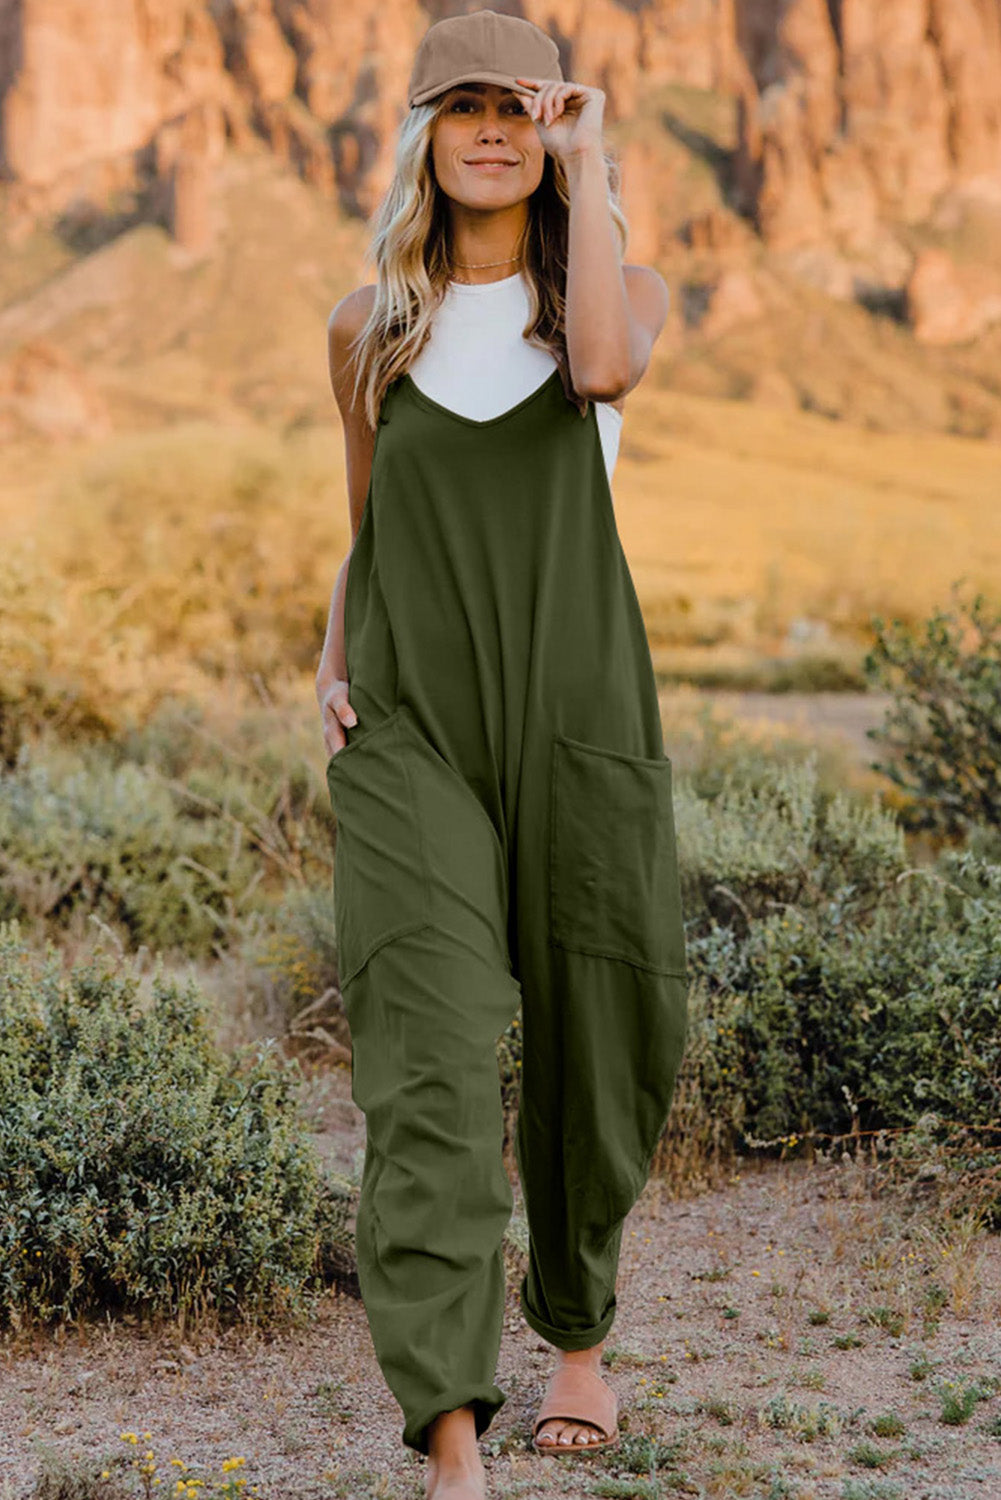 V-Neck Sleeveless Jumpsuit with Pocket Sunset and Swim Army Green S 